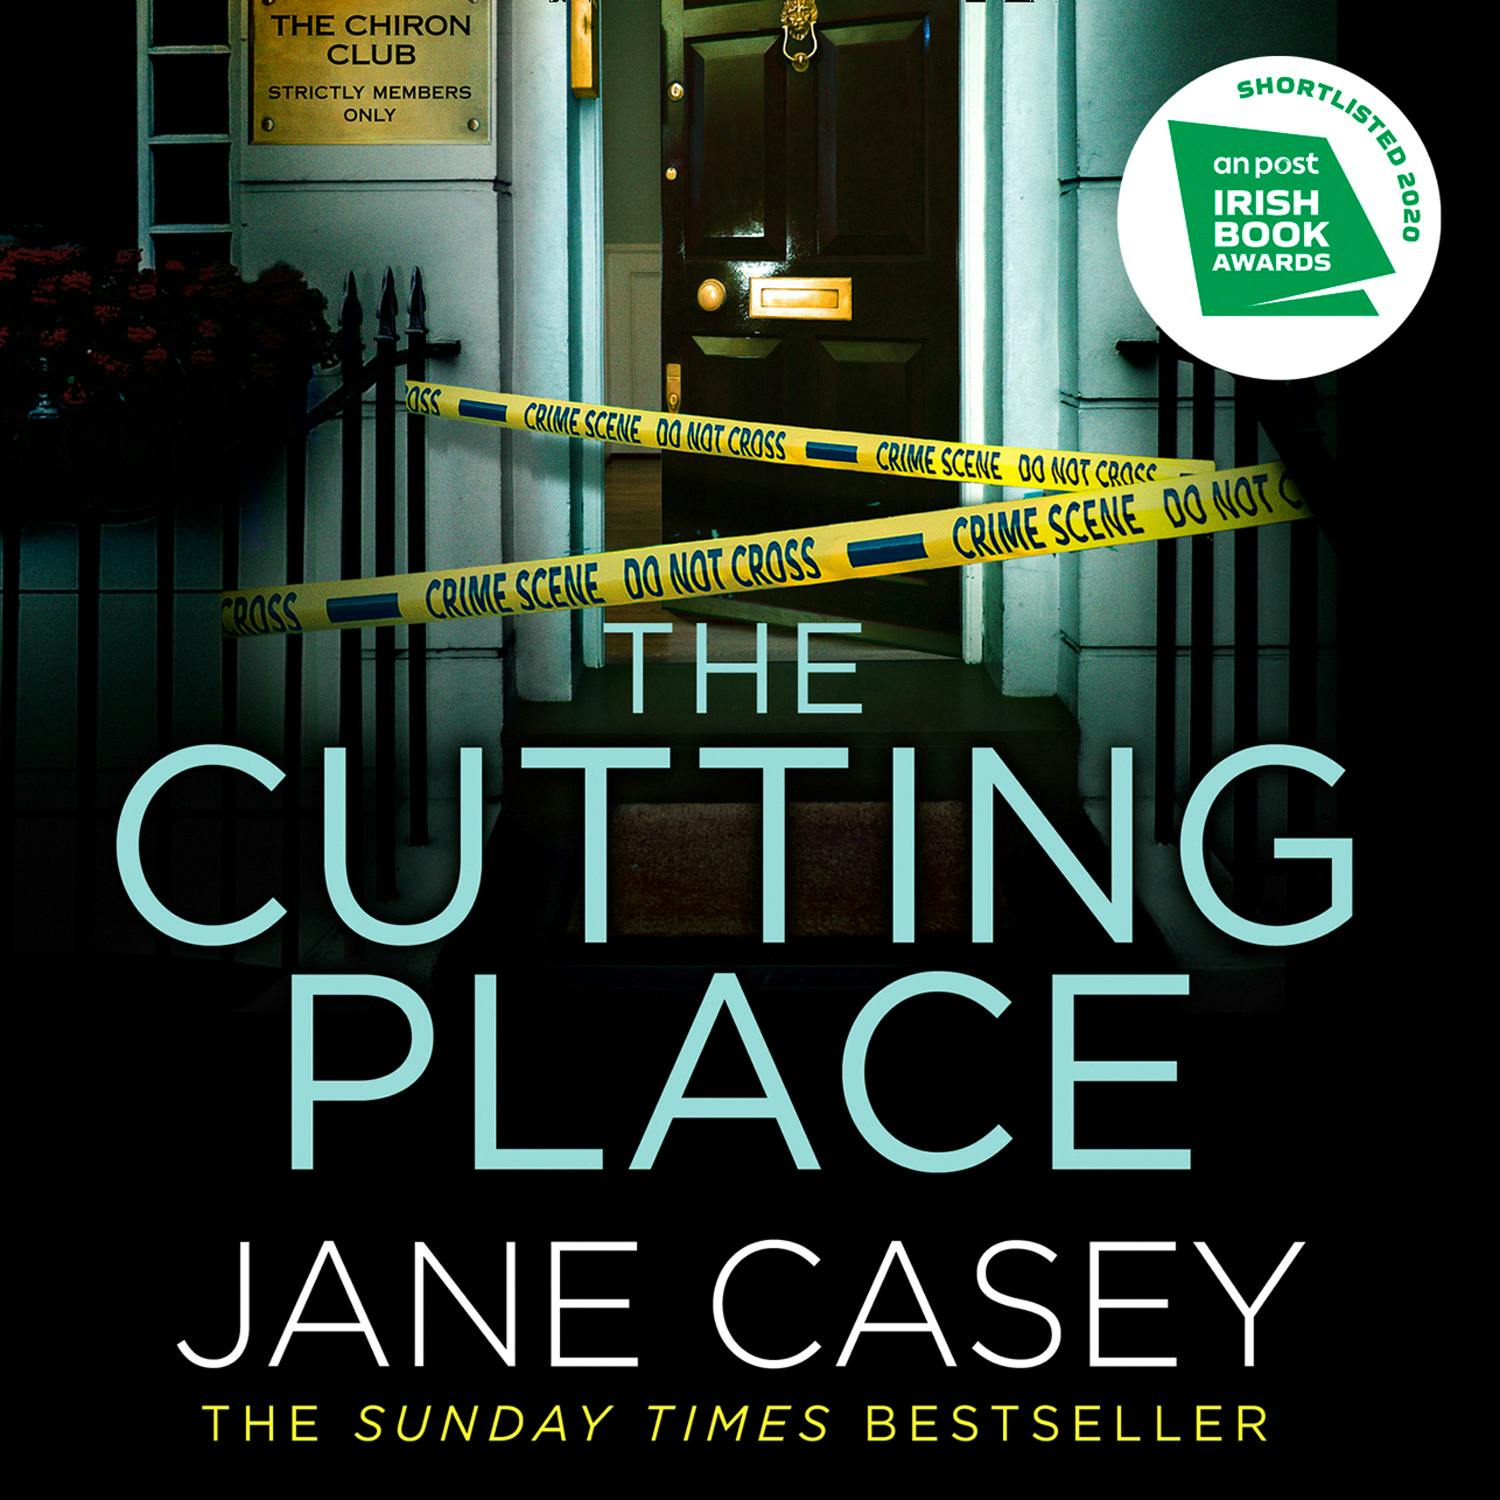 The Cutting Place - Jane Casey